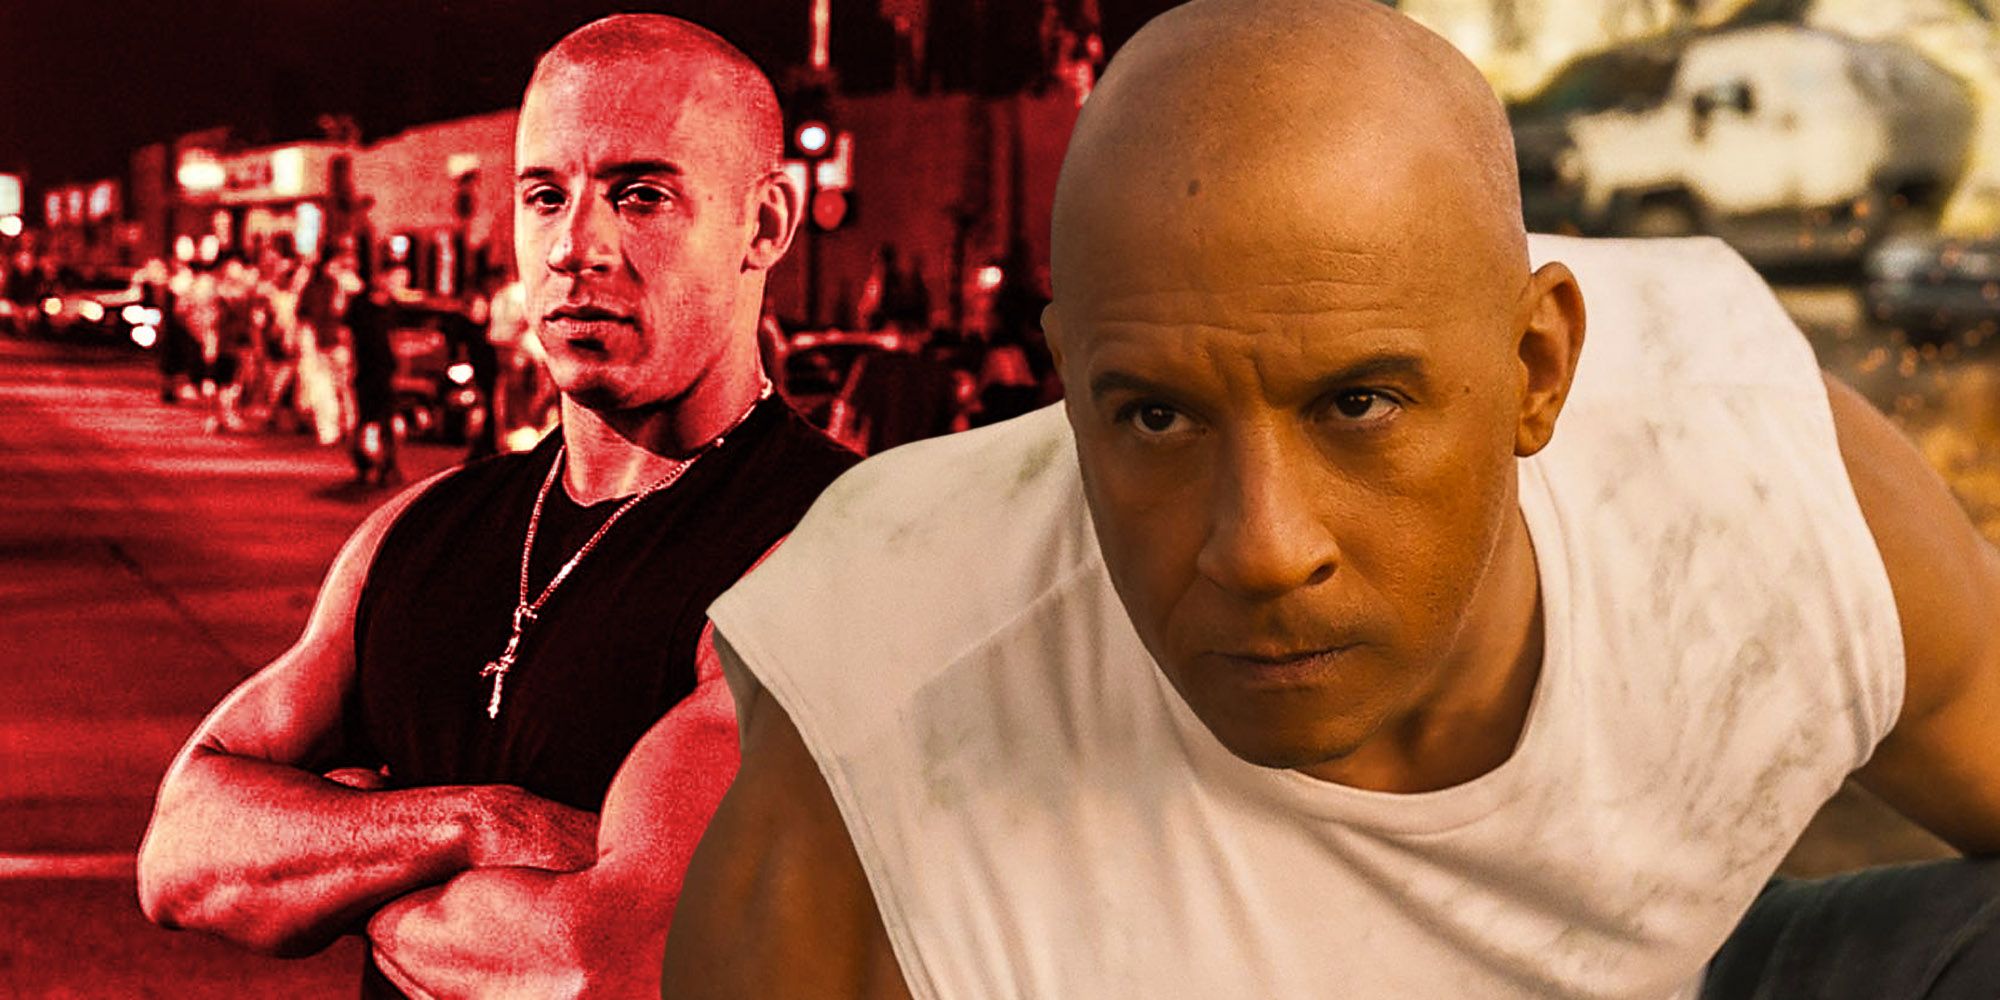 fast-furious-9-completes-the-mythic-transformation-of-dominic-toretto